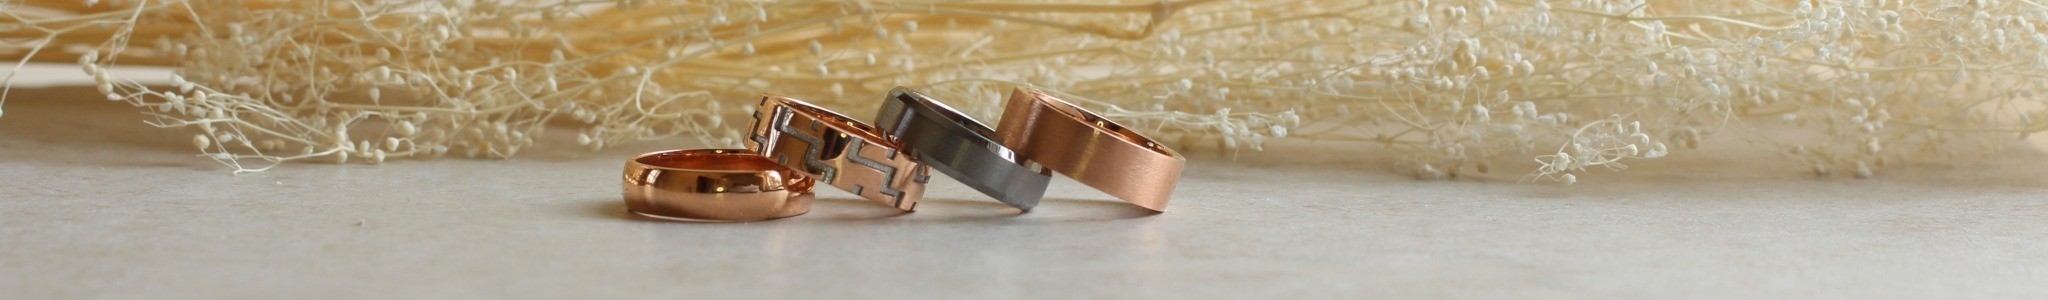 Man's Bands Product Line Image